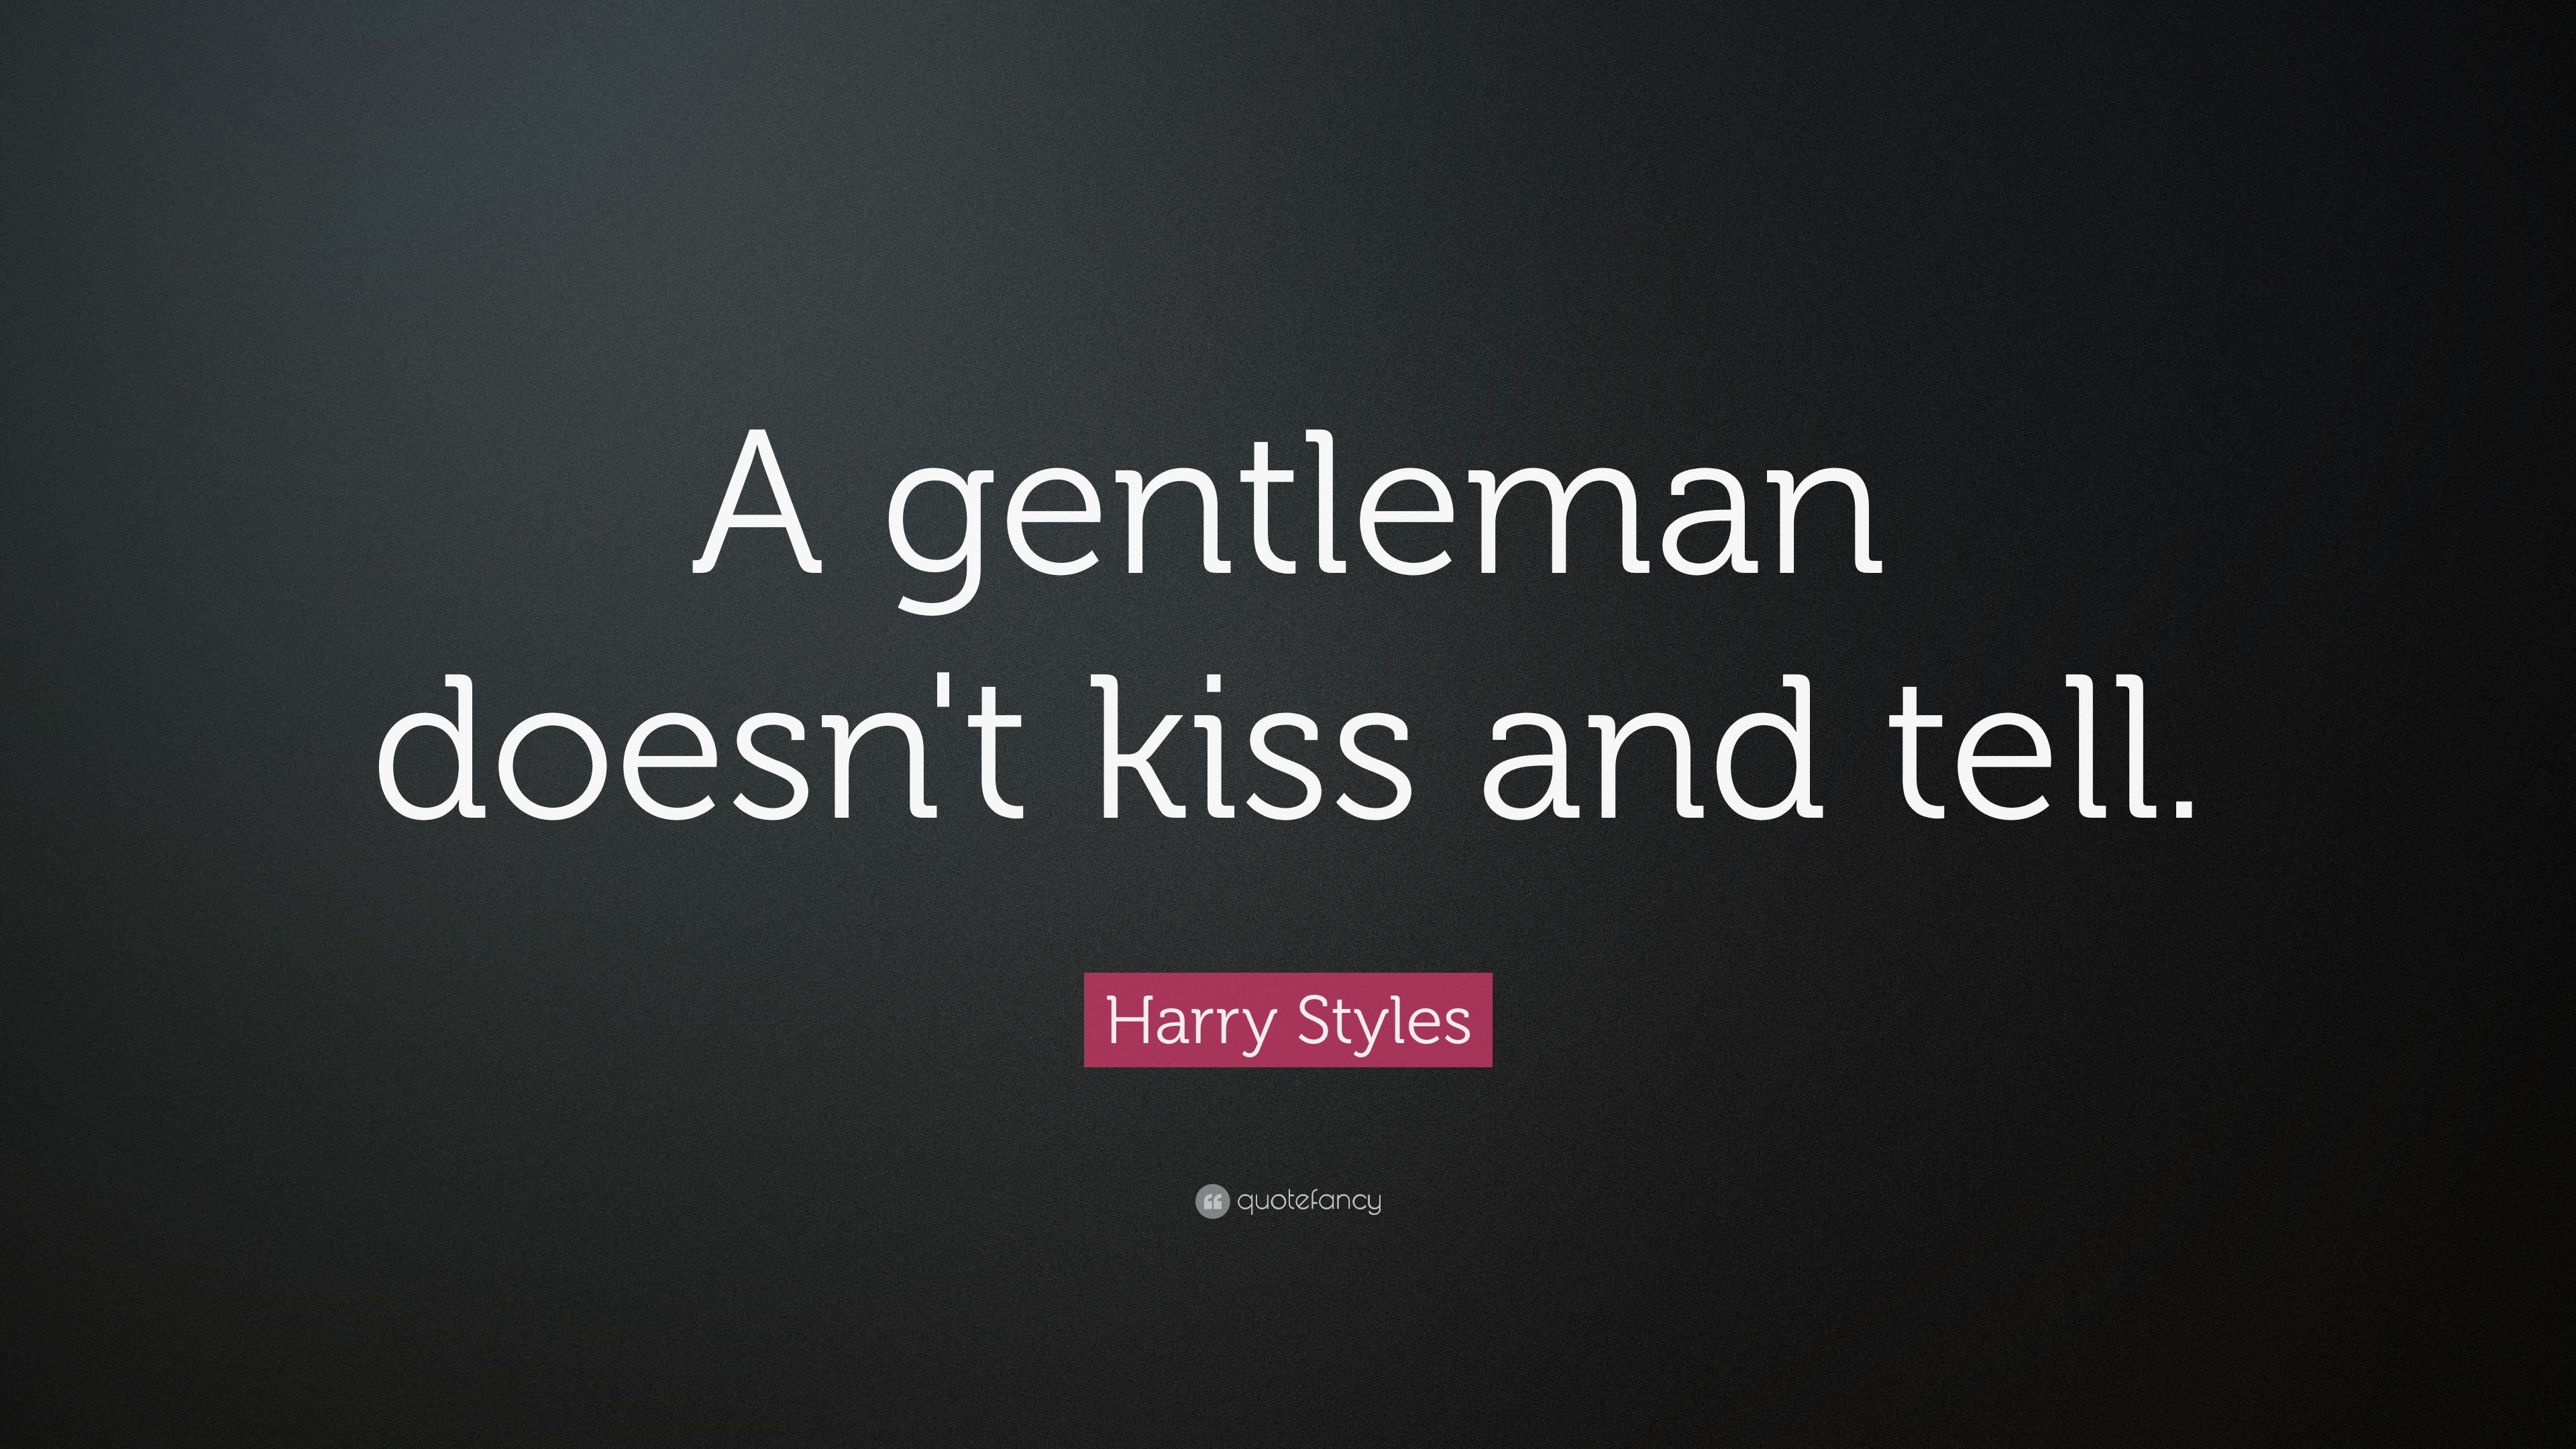 Harry Styles Quote: “A gentleman doesn't kiss and tell.” 16